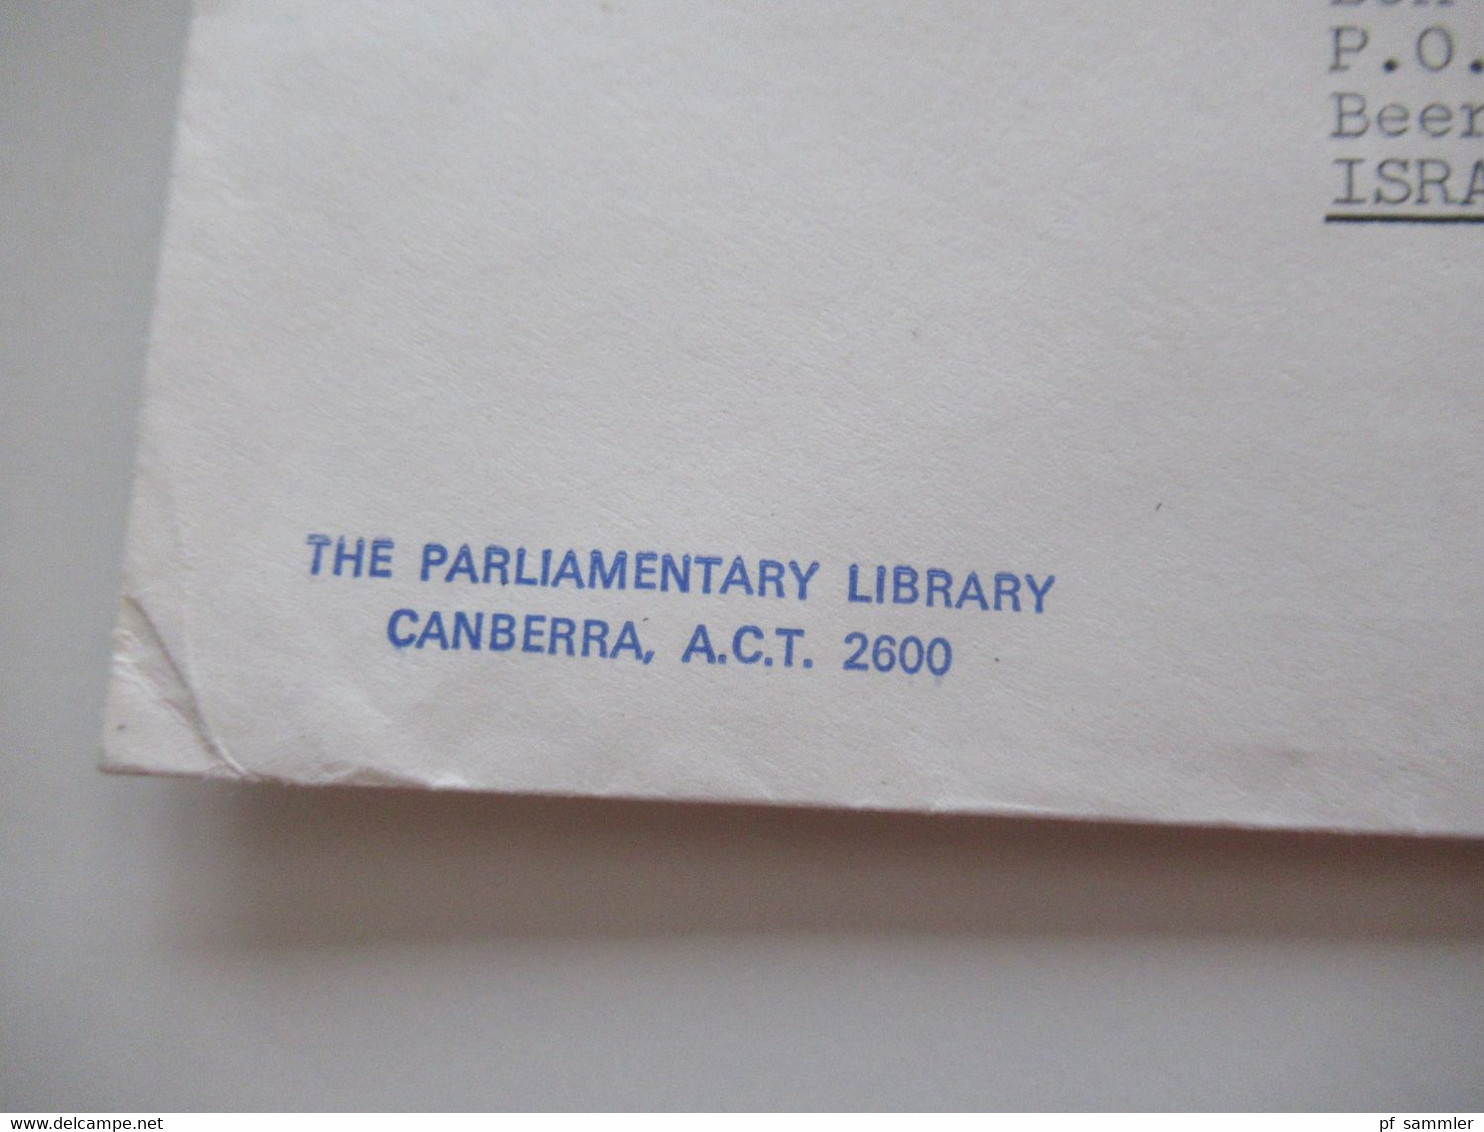 1976 Air Mail Nach Israel Freistempel Canberra Parliament House IW 9 Postage Paid Umschlag The Parliament Library - Cartas & Documentos